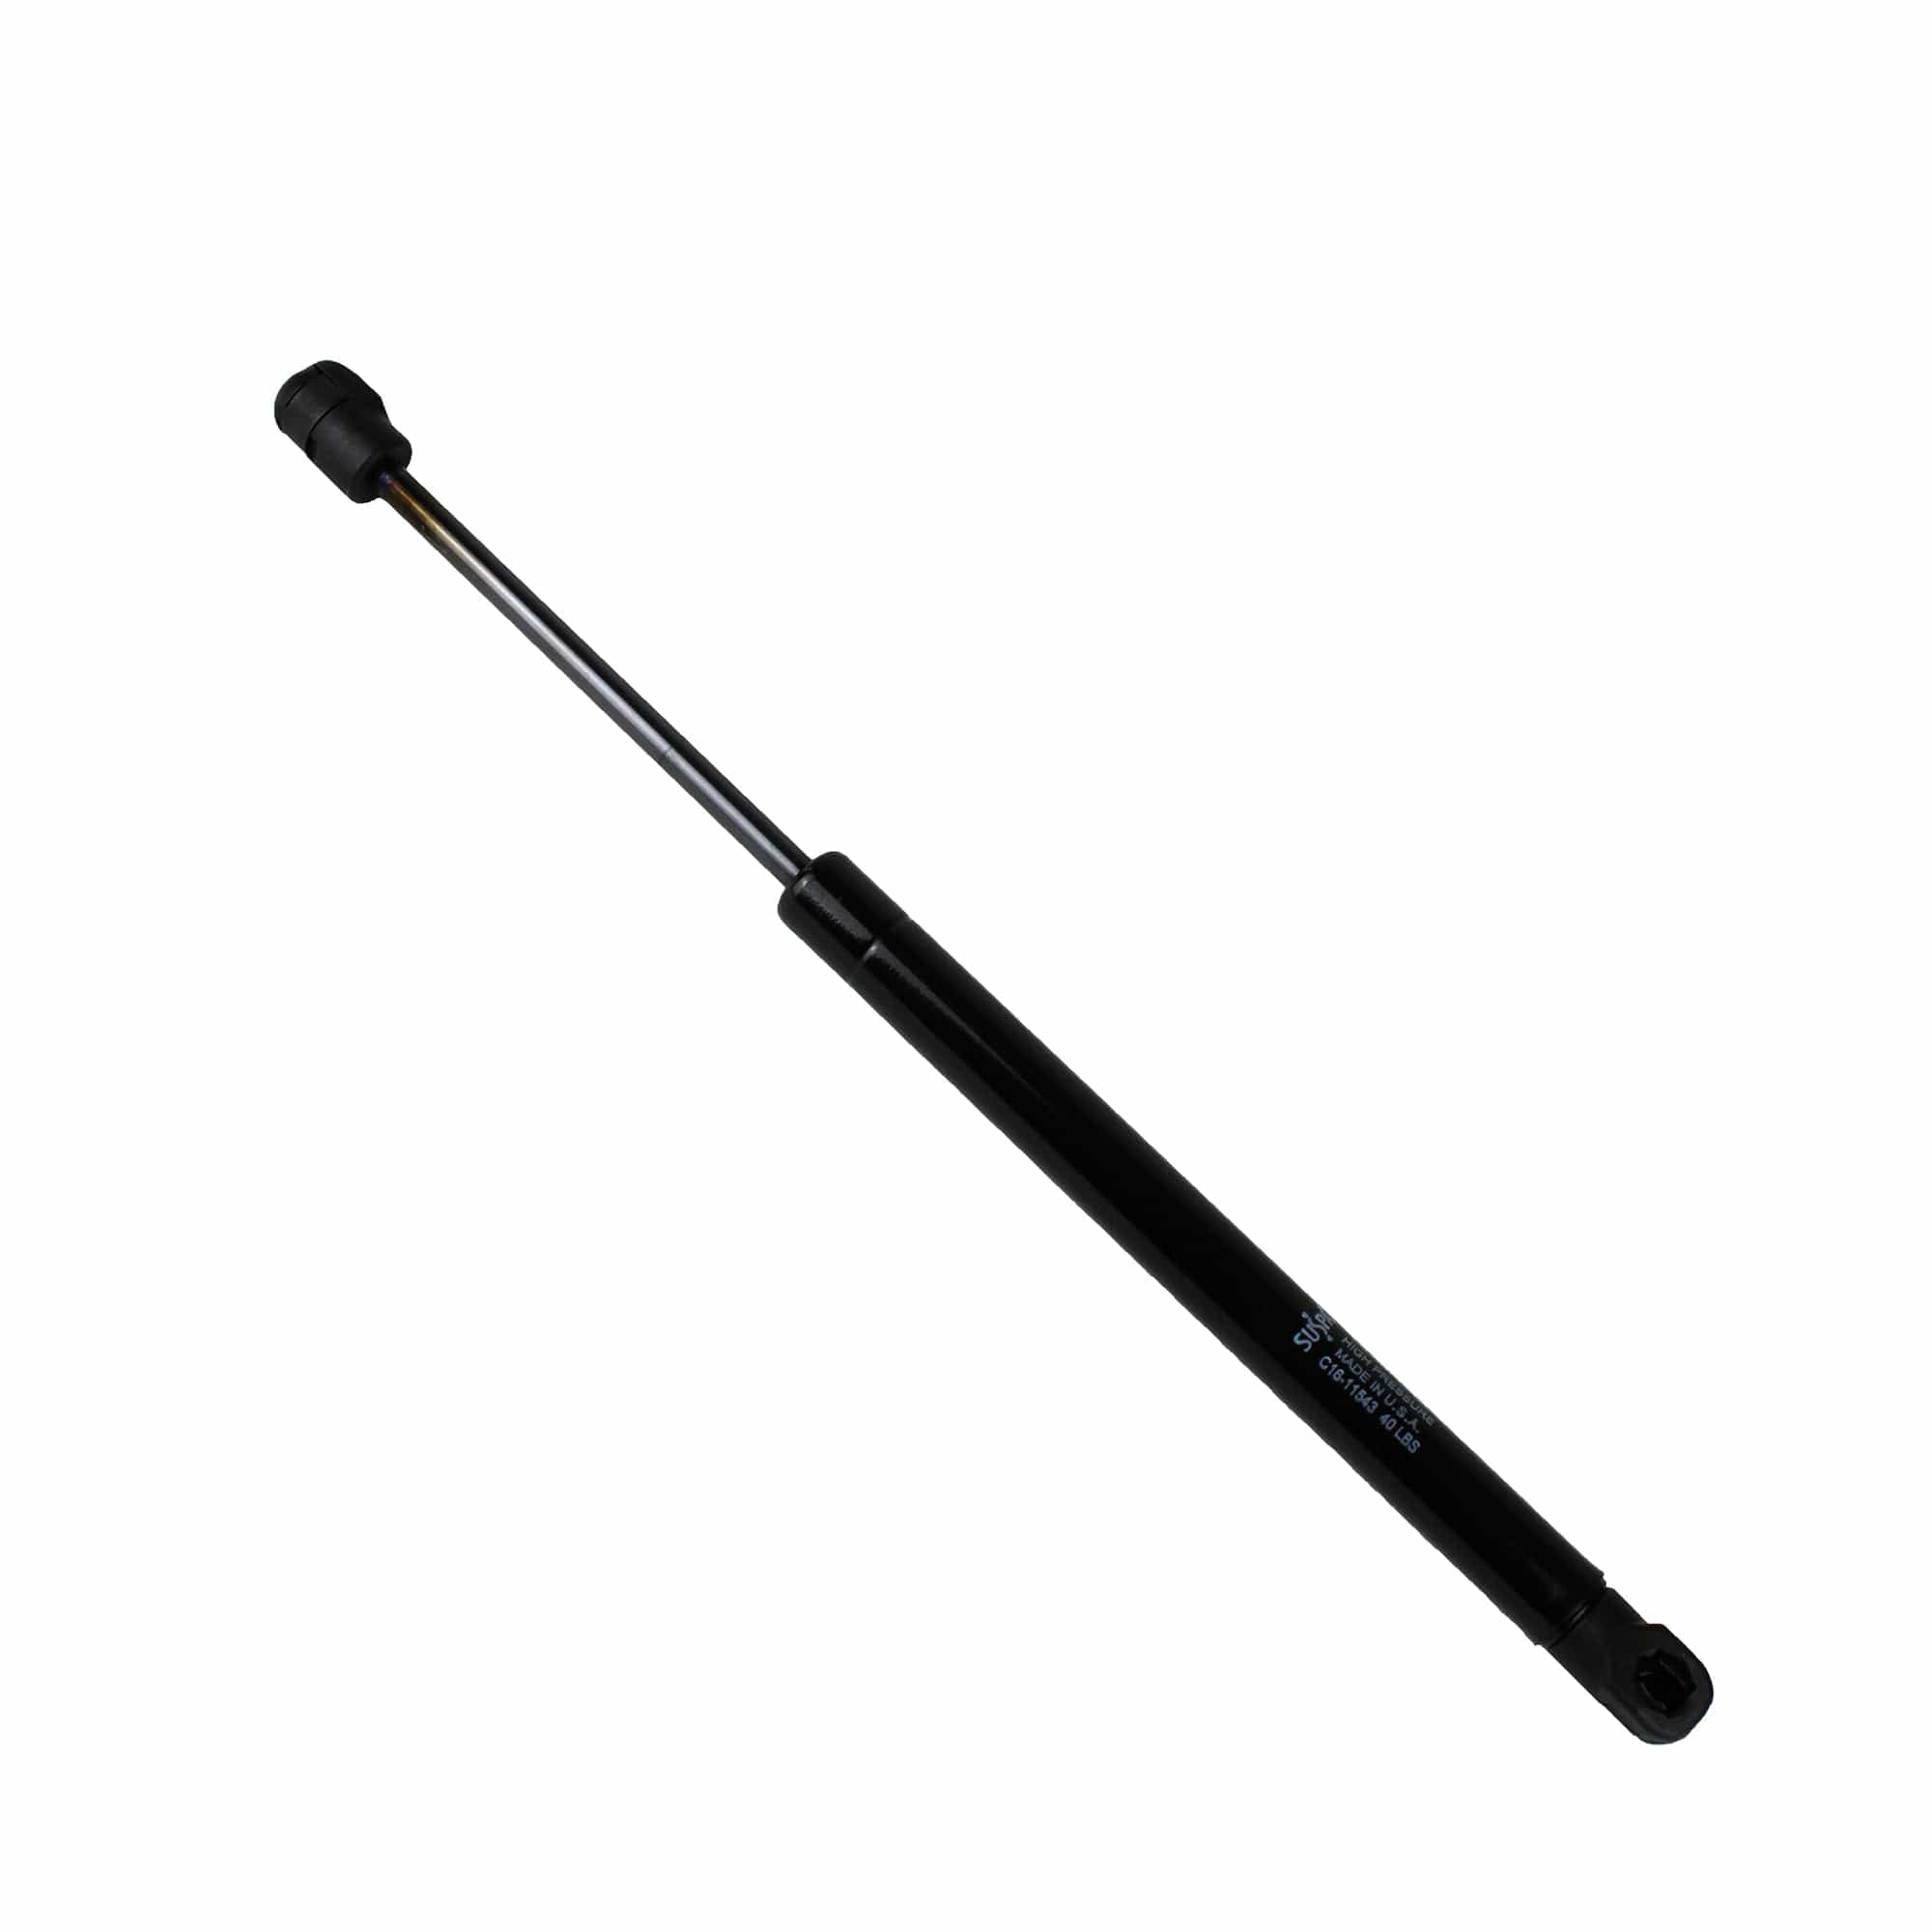 AP Products 010-130 Gas Prop, 14.53" Extended, 4.92" Stroke, 40 Lb.